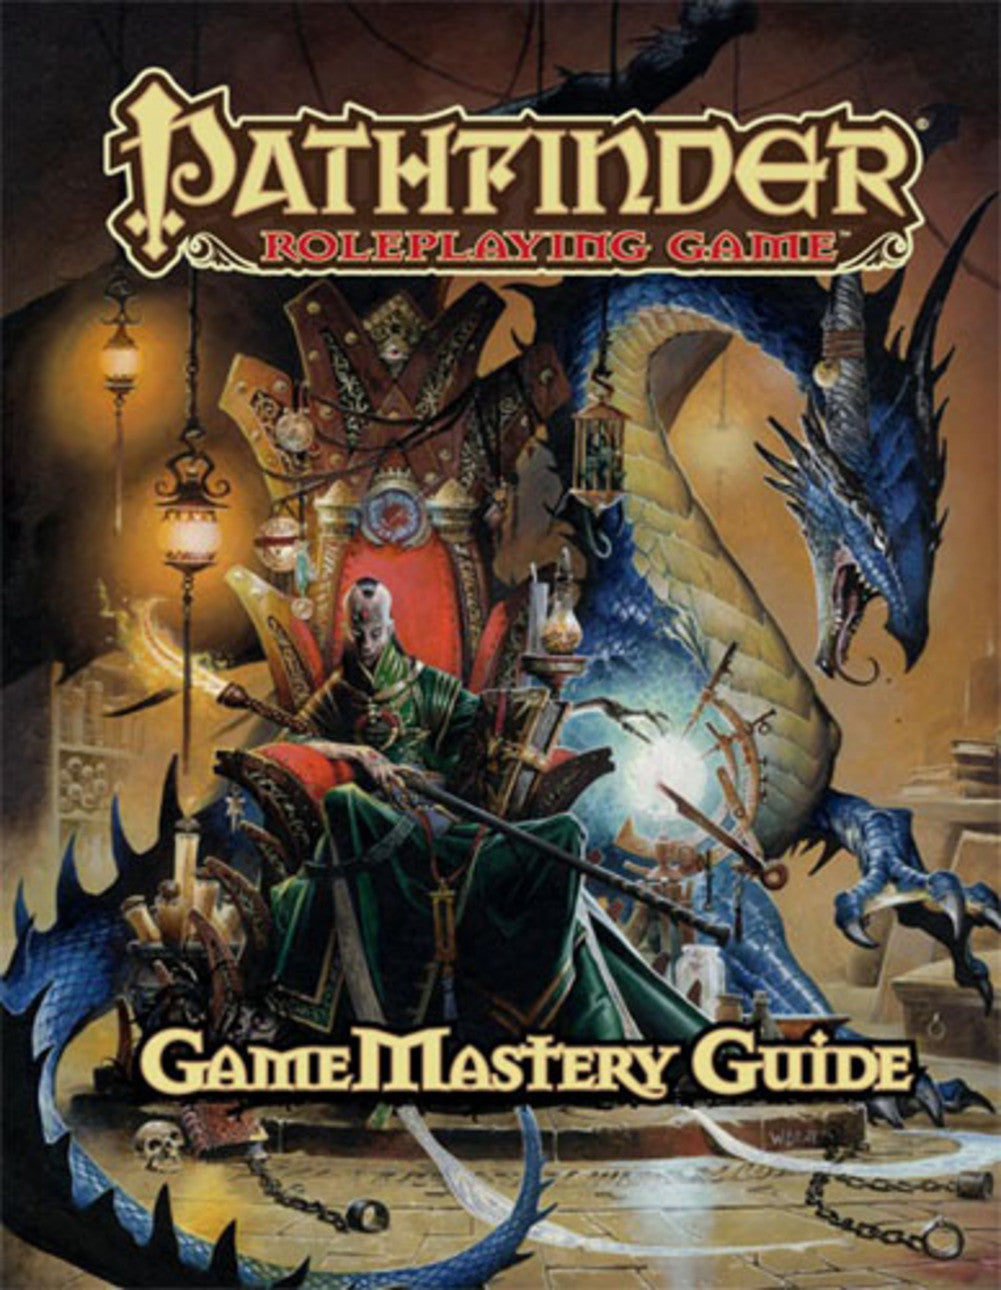 Pathfinder Roleplaying Game: Gamemastry Guide